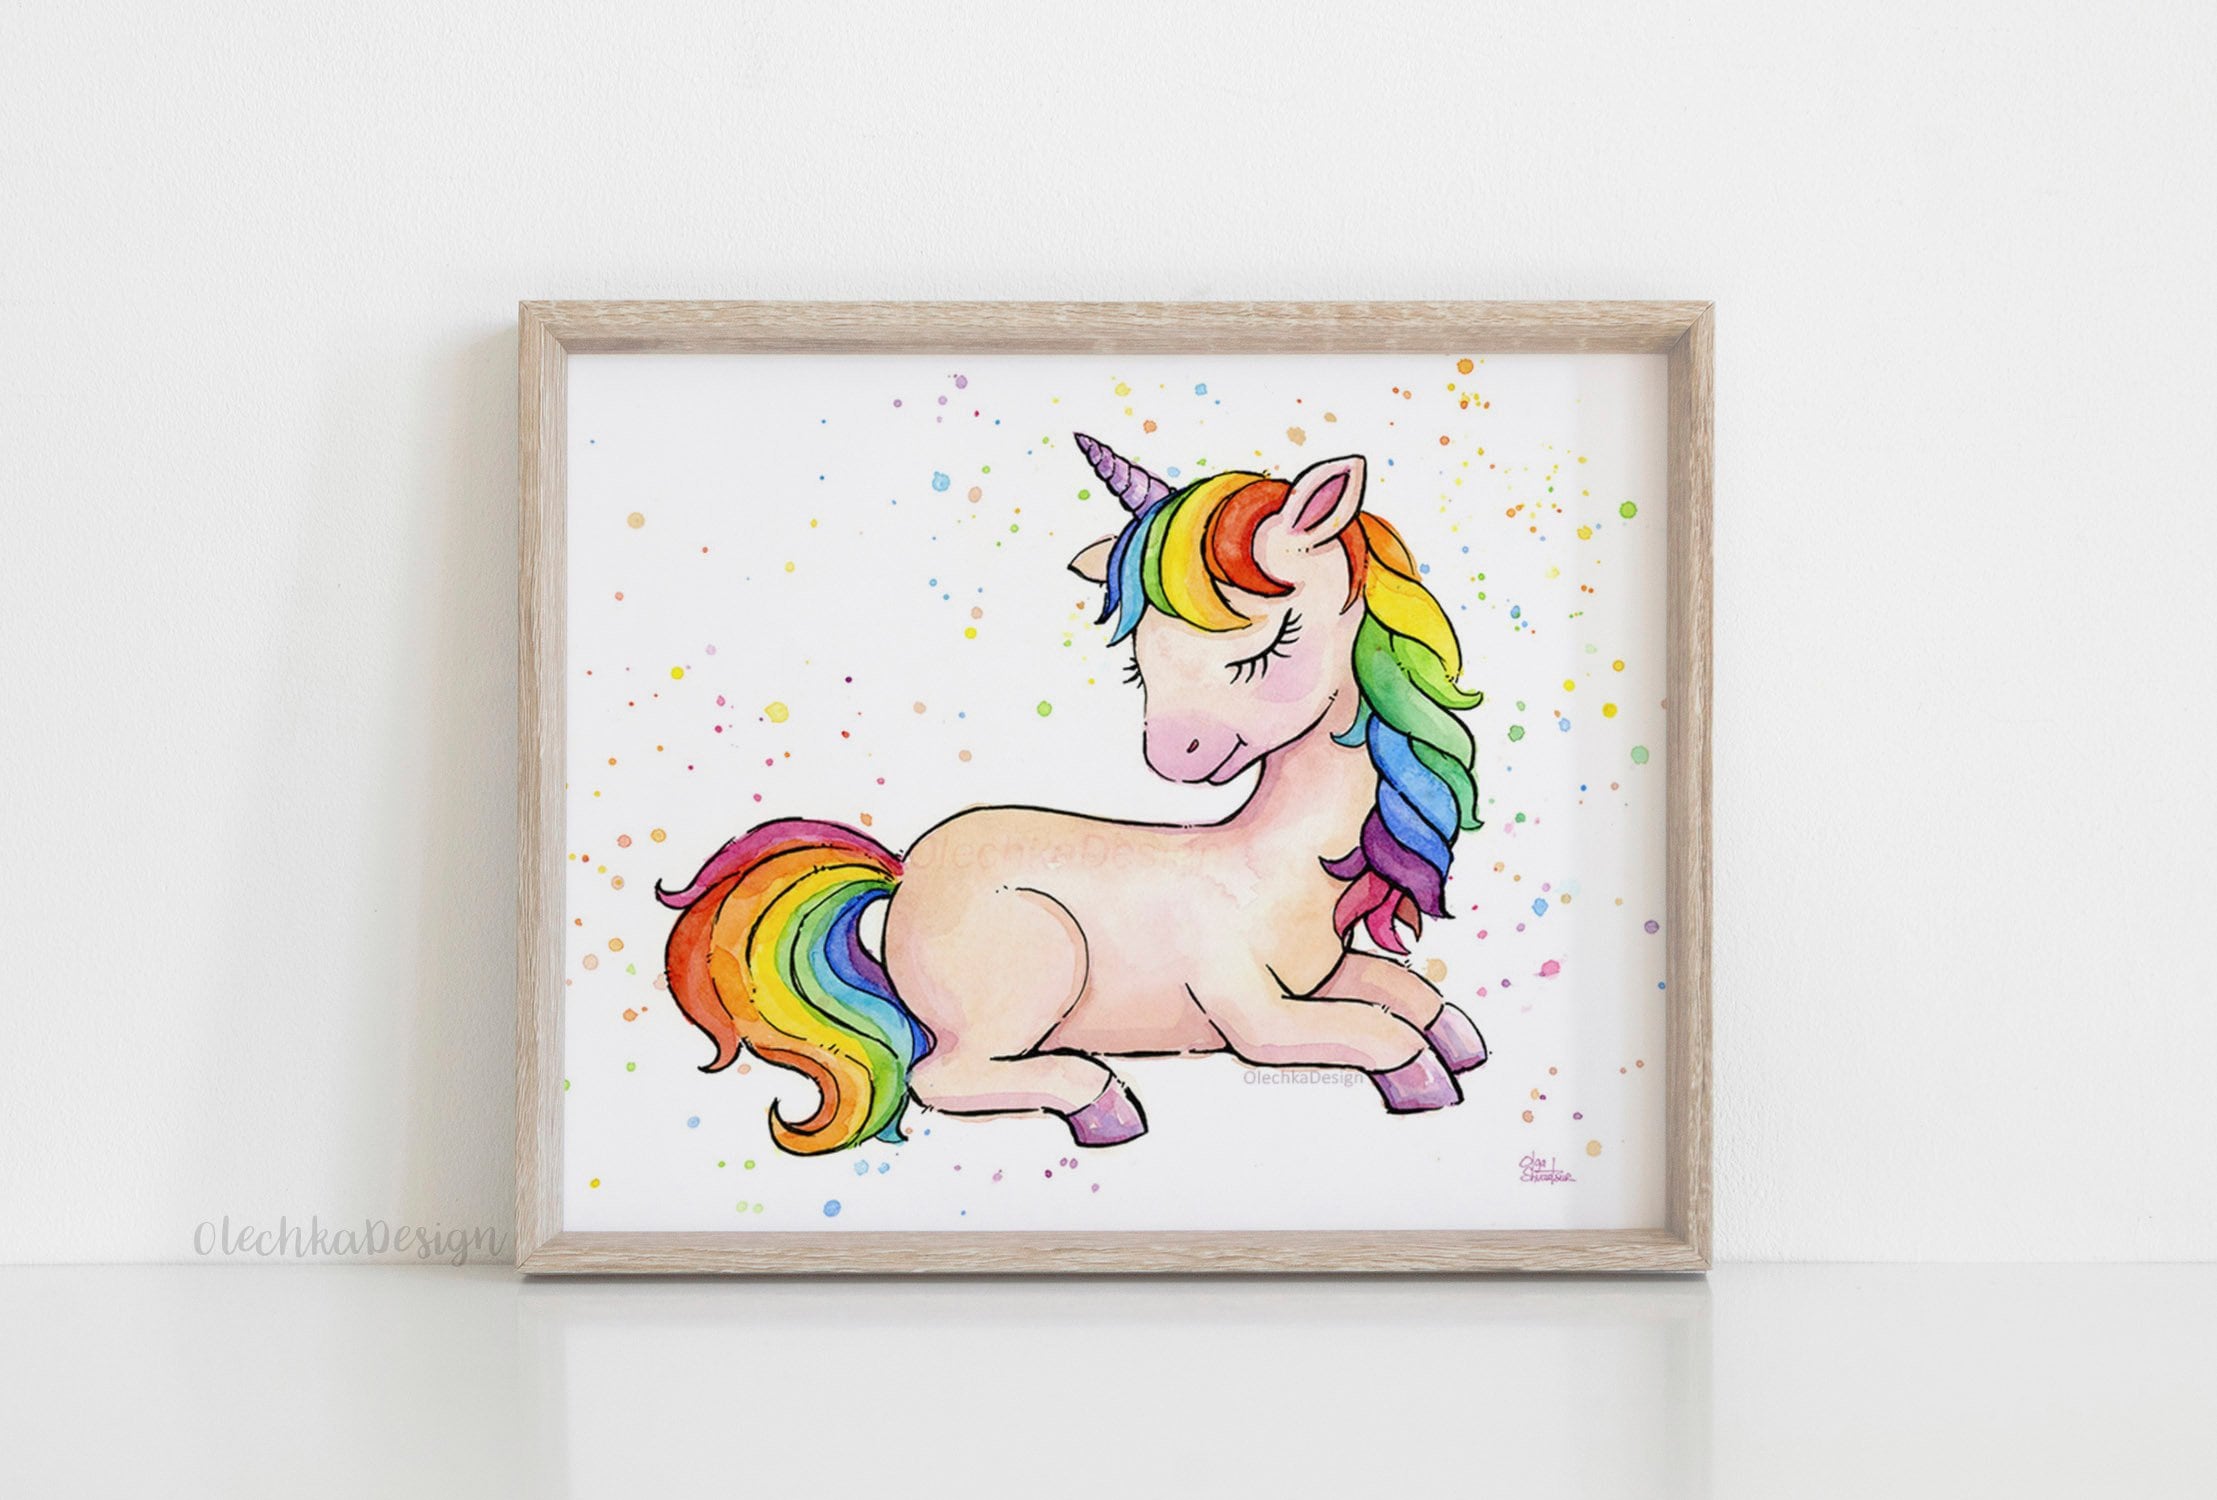  KIDS REPUBLIC, Unicorn Gifts for Girls & Boys Unicorn Toys for  3 Years Old Painting Your own Unicorn : Toys & Games